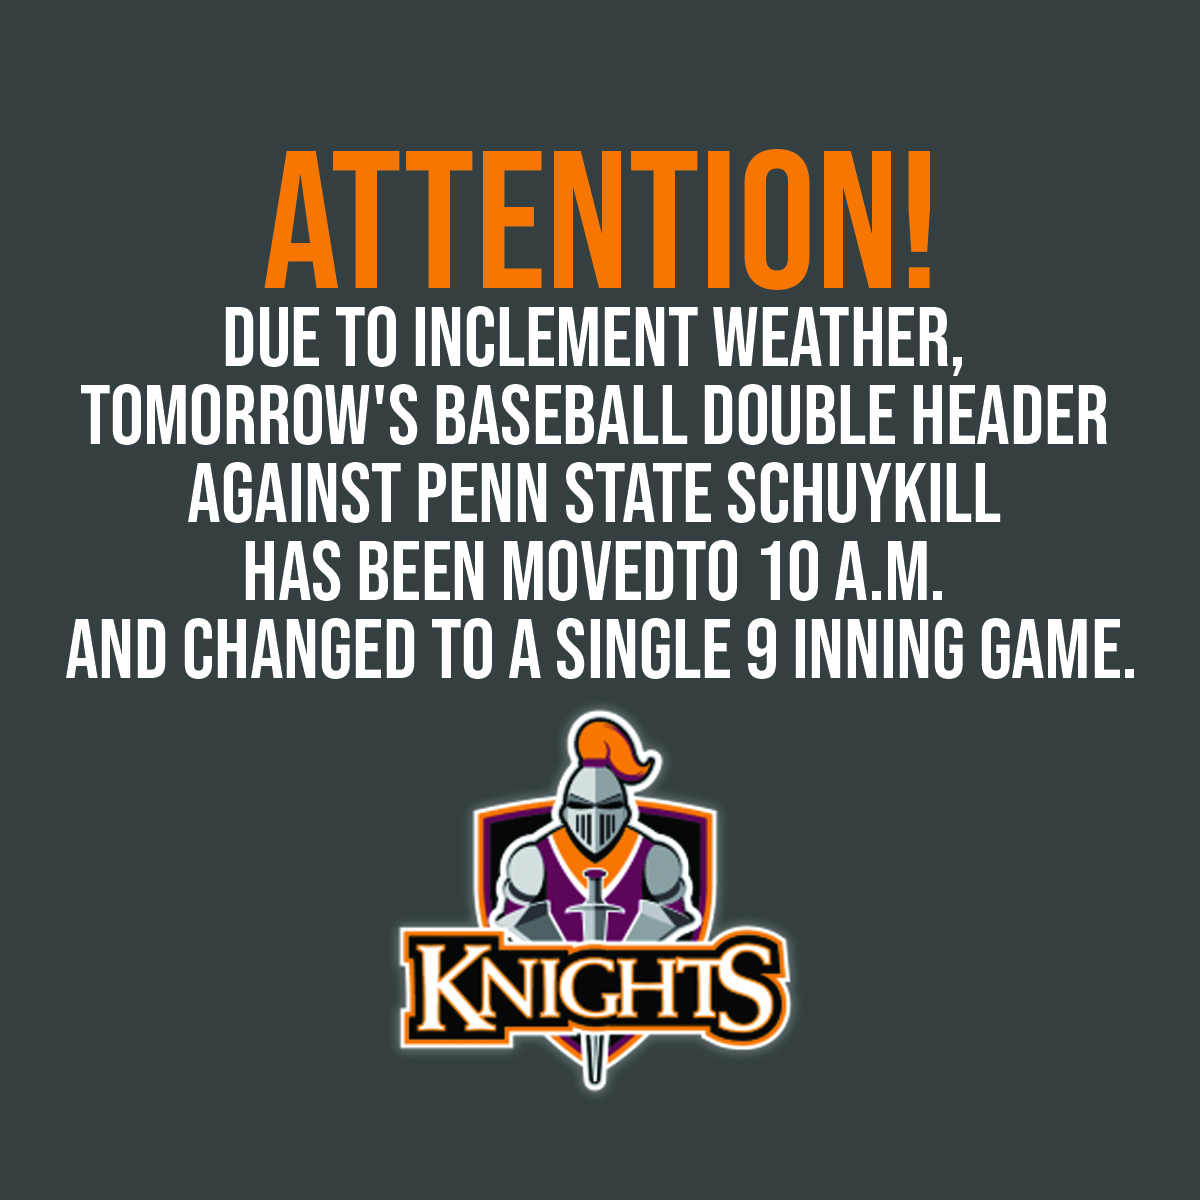 Attention! Due to inclement weather, tomorrow's baseball double header against Penn State Schuykill has been moved to 10 a.m. and changed to a single 9 inning game.